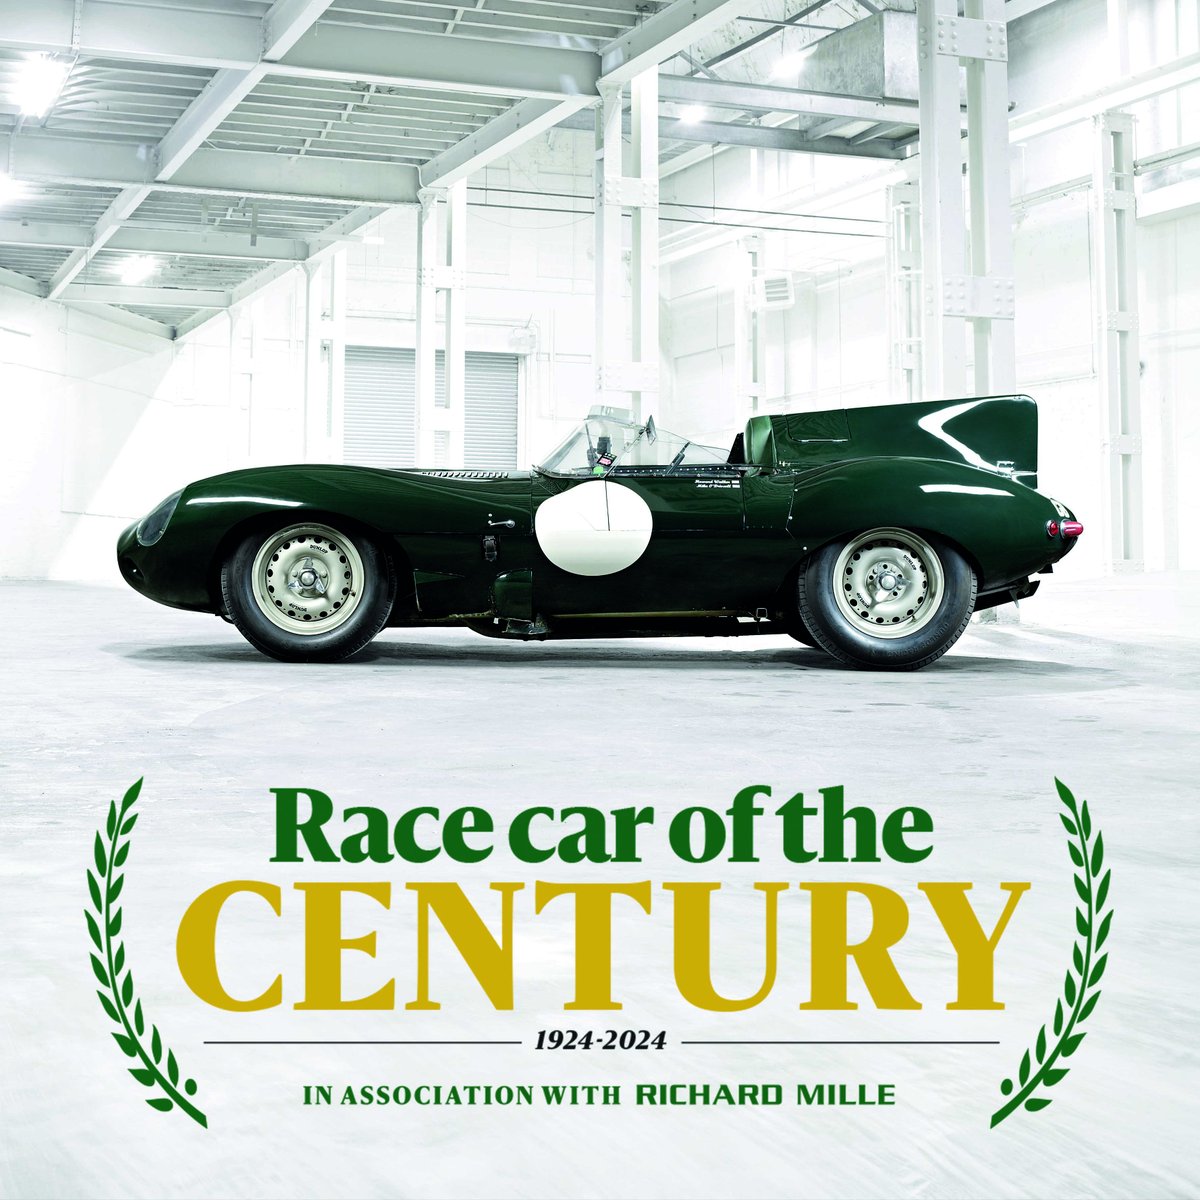 The slippery D-type topped a terrific 1950s for Jaguar and won where it mattered: Le Mans. Read its brilliant story, then cast your vote to choose the #RC100 'Race car of the Century' – in association with @Richard_Mille and @Footman_James. bit.ly/3VWQ0eI